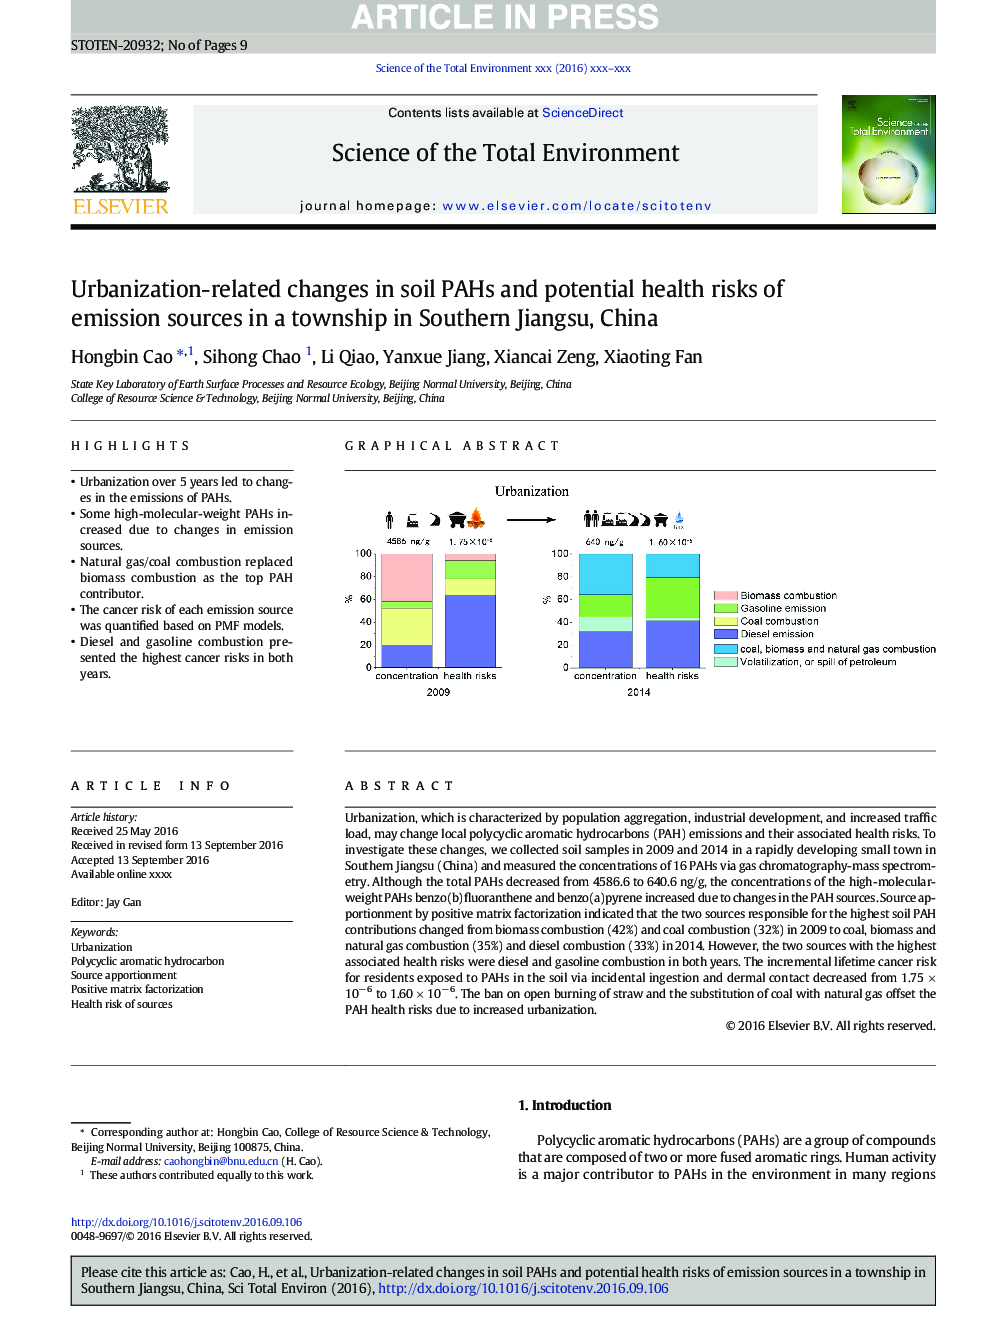 Urbanization-related changes in soil PAHs and potential health risks of emission sources in a township in Southern Jiangsu, China